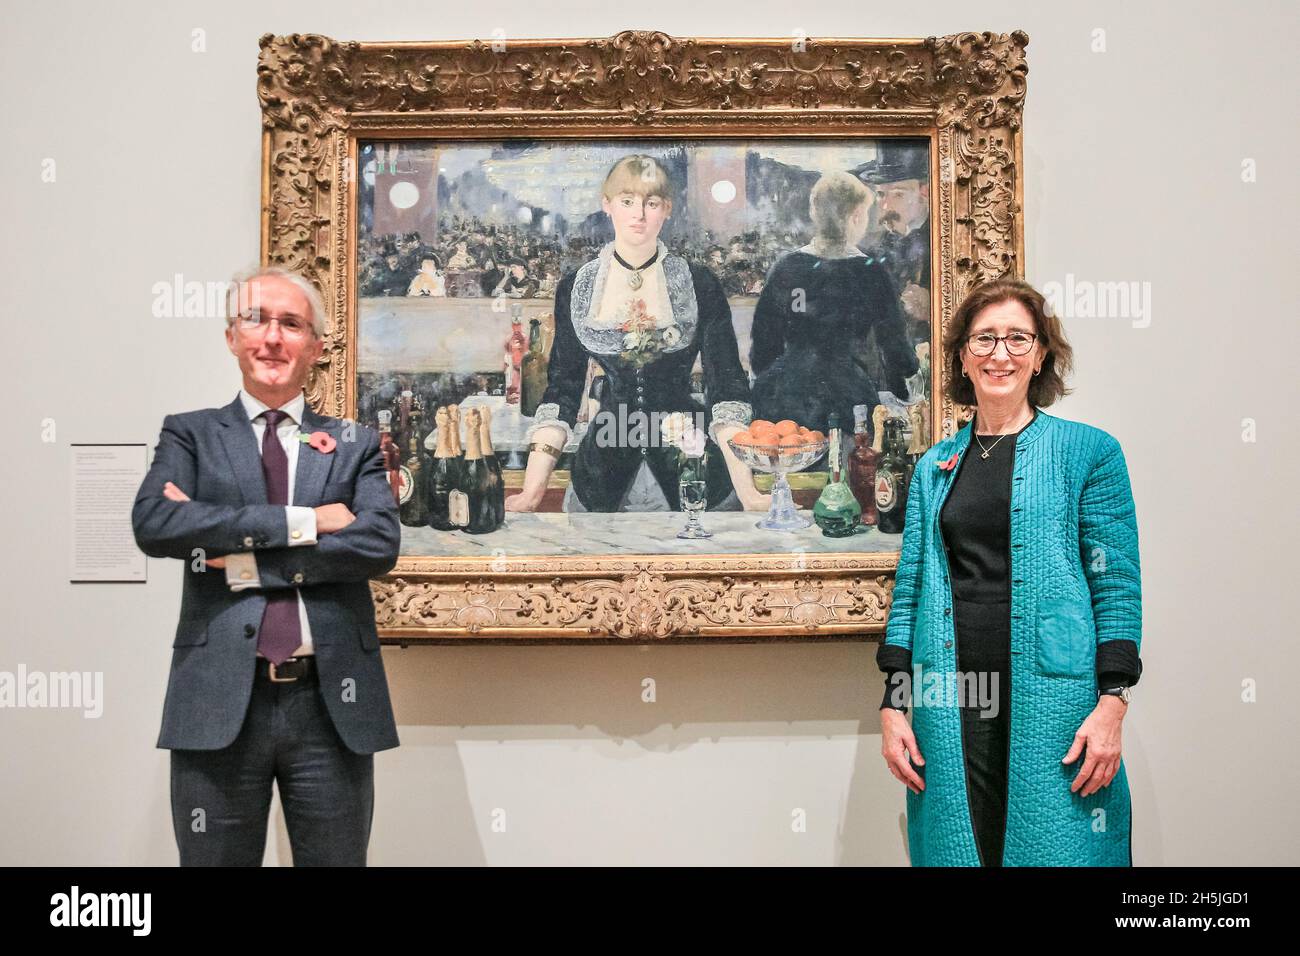 London, UK. 10th Nov, 2021. Courtauld Directors, Dr. Ernst Vegelin van Claerbergen, and Professor Deborah Swallow, with Edouard Manet's 'A Bar at the Folies-Bergere', (1882). The Courtauld Gallery at Somerset House in London will re-open to the public on Friday 19 November following the most significant modernisation project in its history, providing a transformed home for one of the UK's greatest art collections. Credit: Imageplotter/Alamy Live News Credit: Imageplotter/Alamy Live News Stock Photo